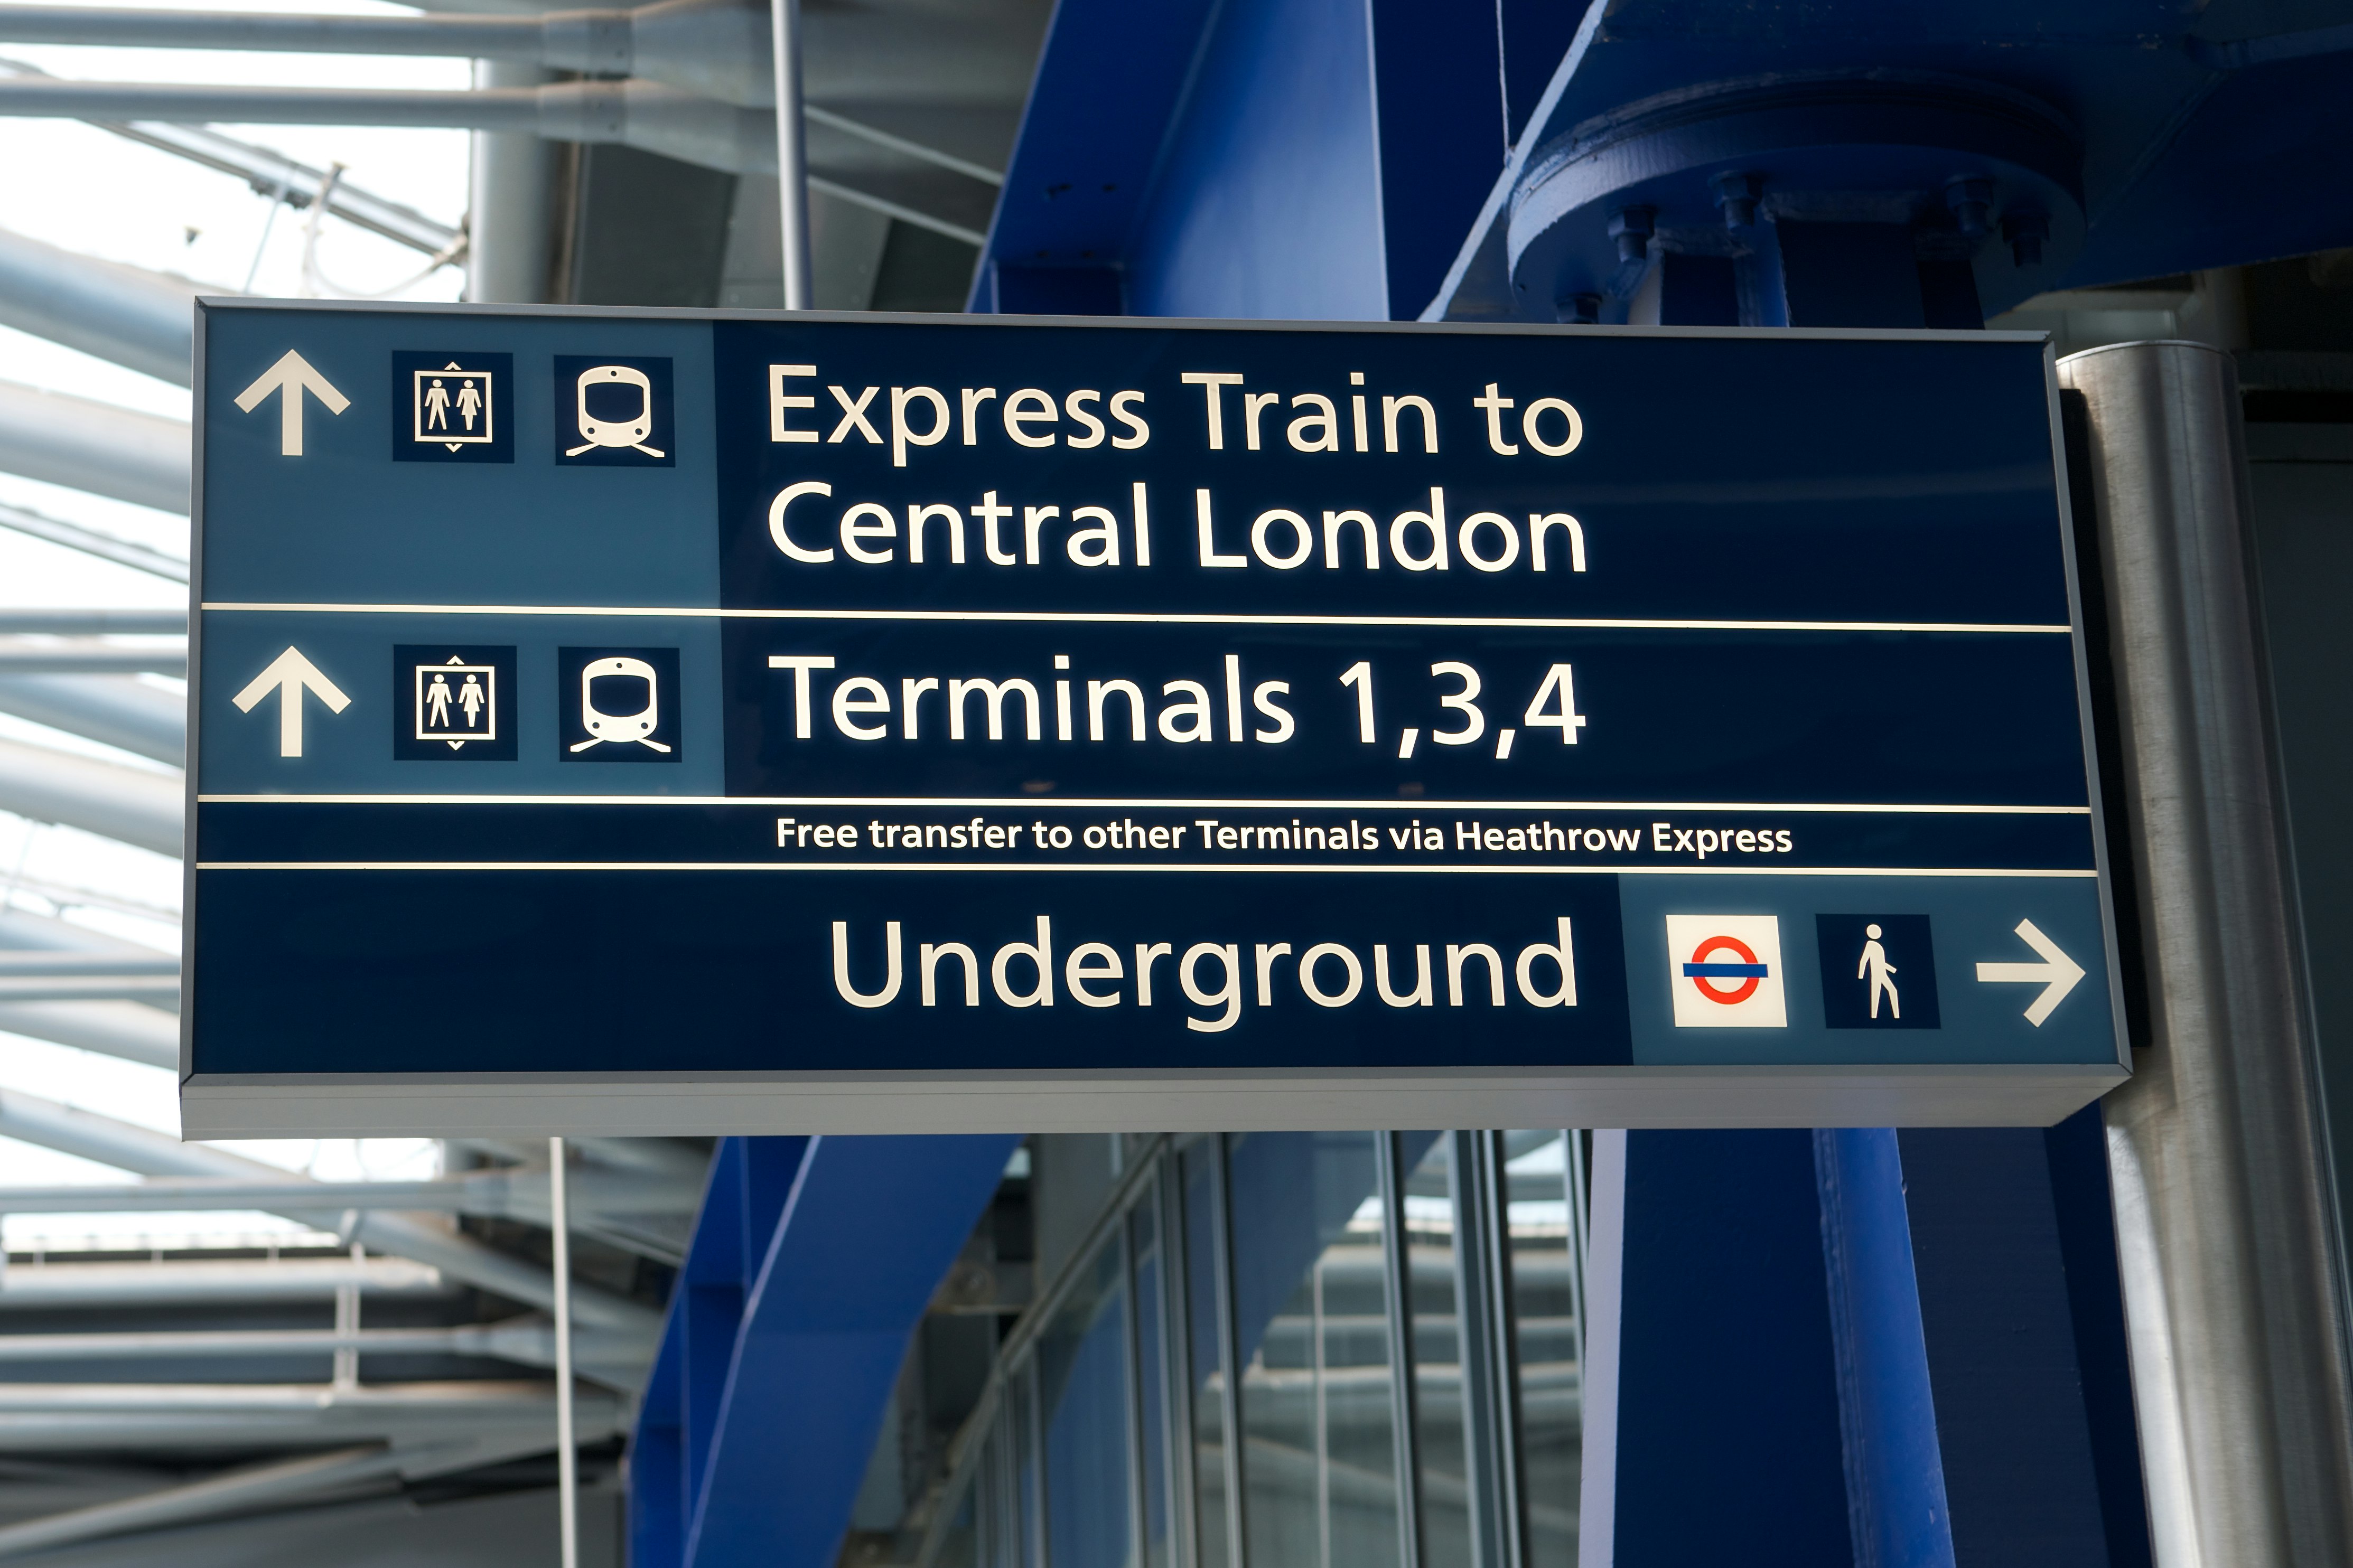 Blue and white sign with a series of icons and words 'express train to central London' 'Terminals 1,3,4' and 'Underground'